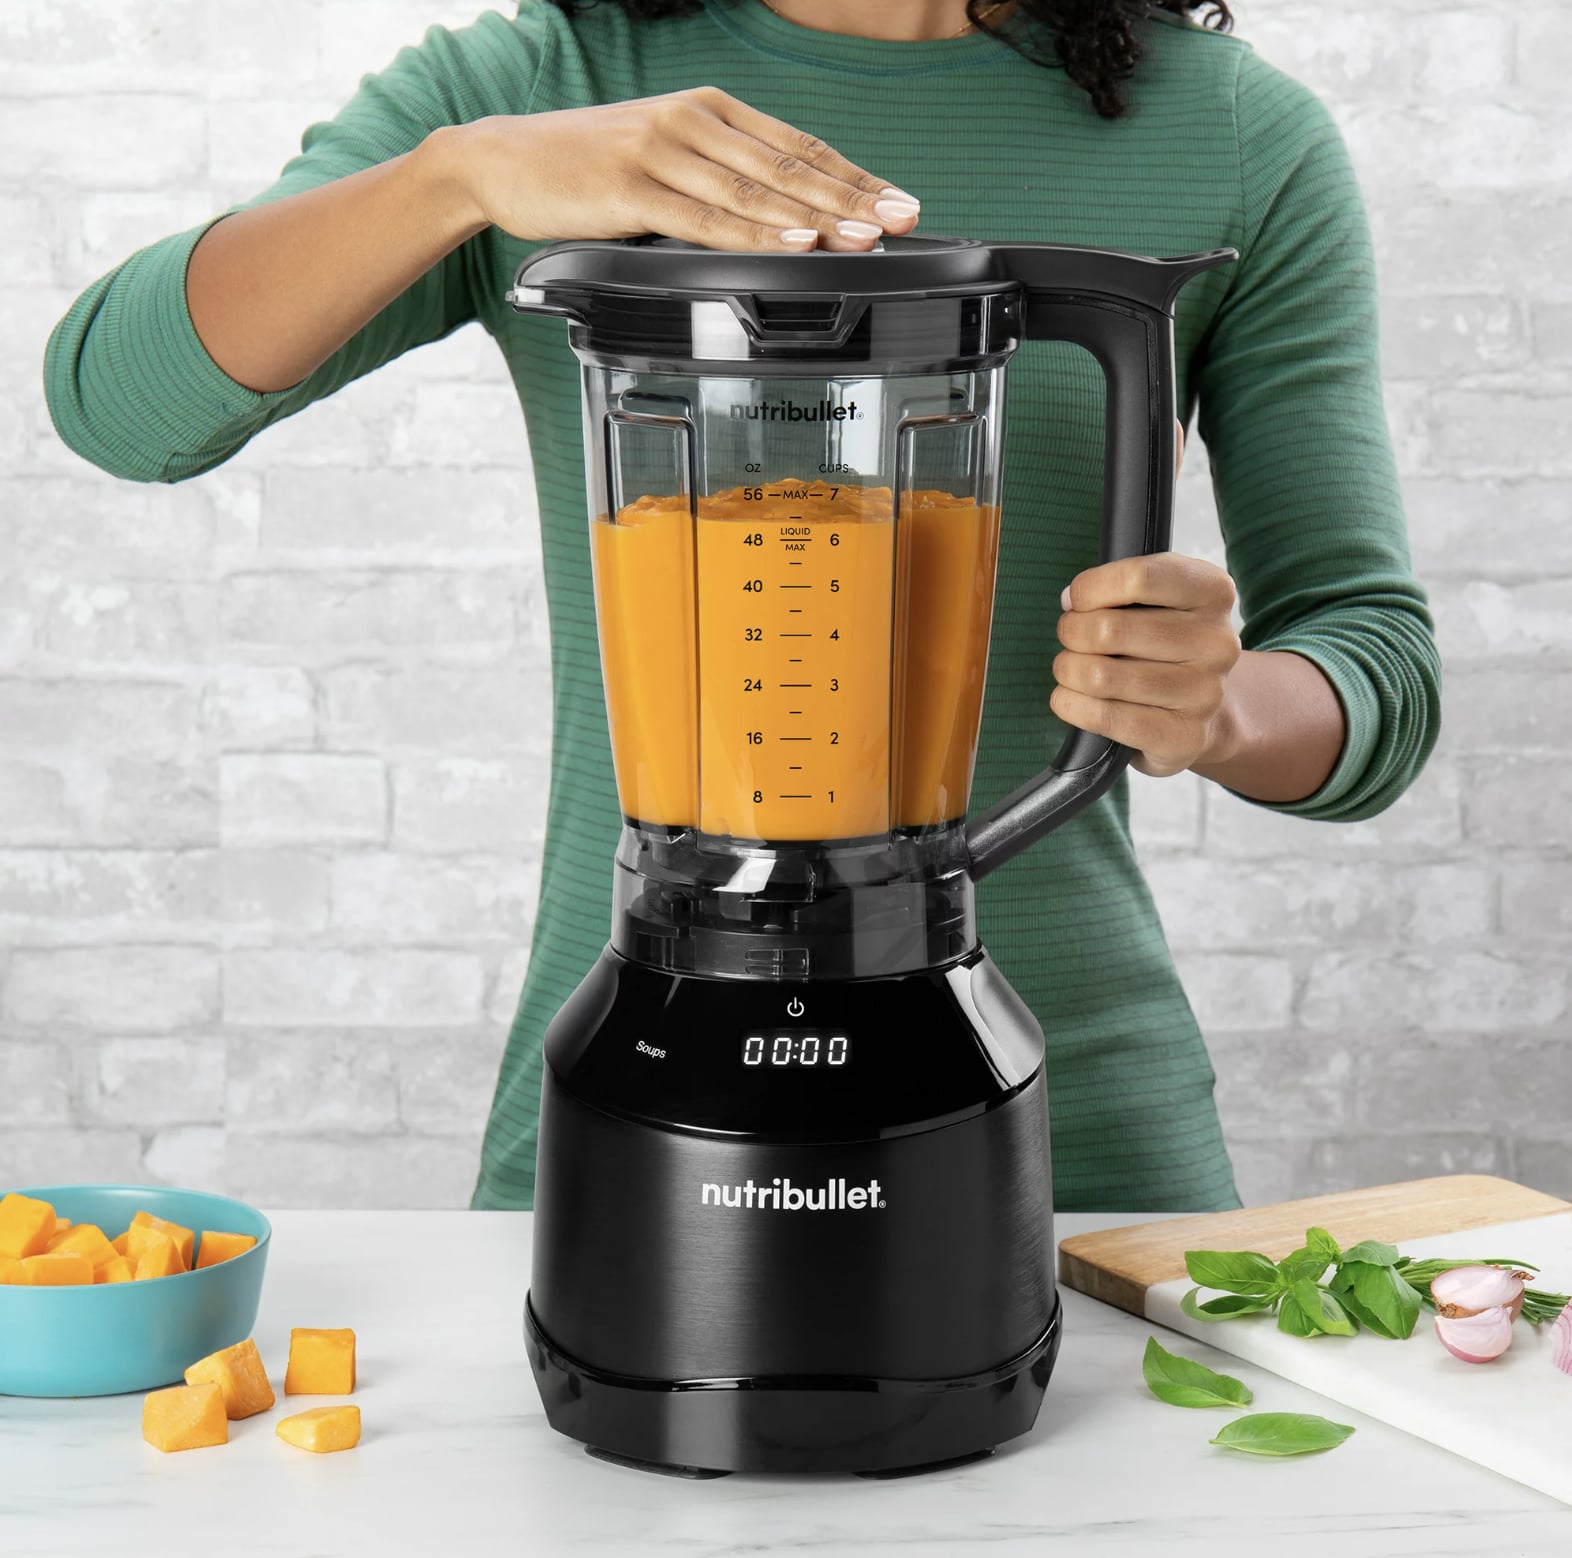 Save big on blenders with Walmart Early Black Friday sale deals on